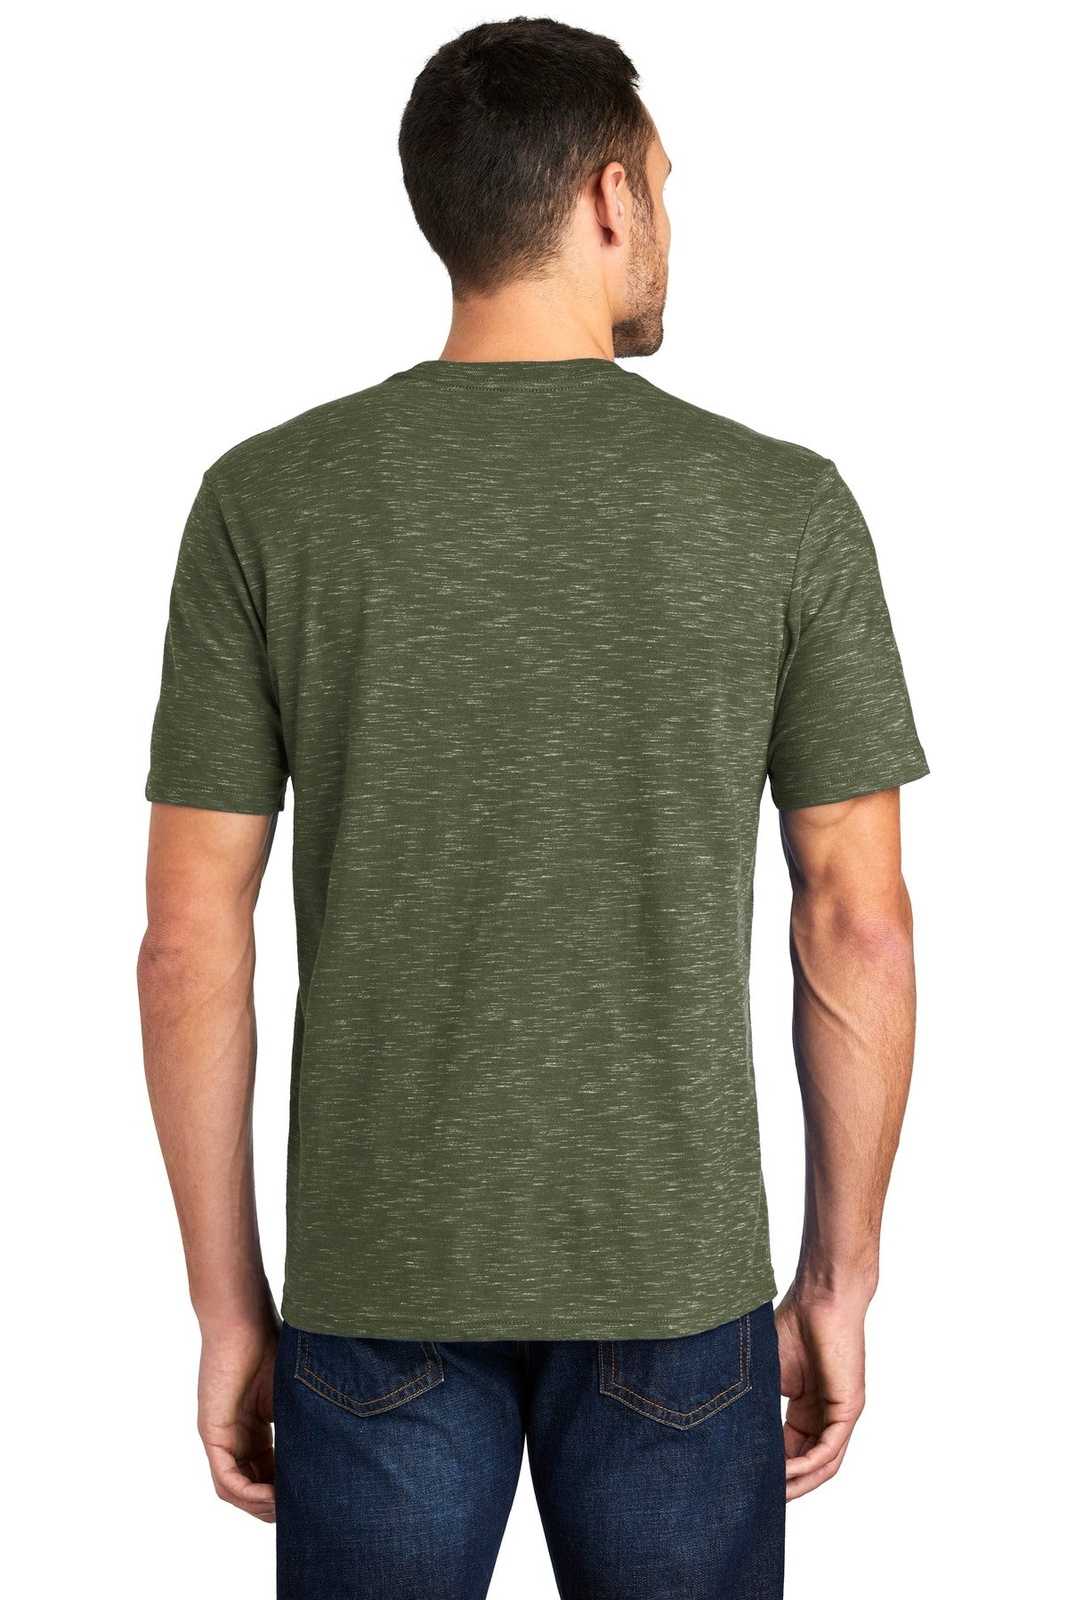 District DT564 Medal Tee - Olive - HIT a Double - 2